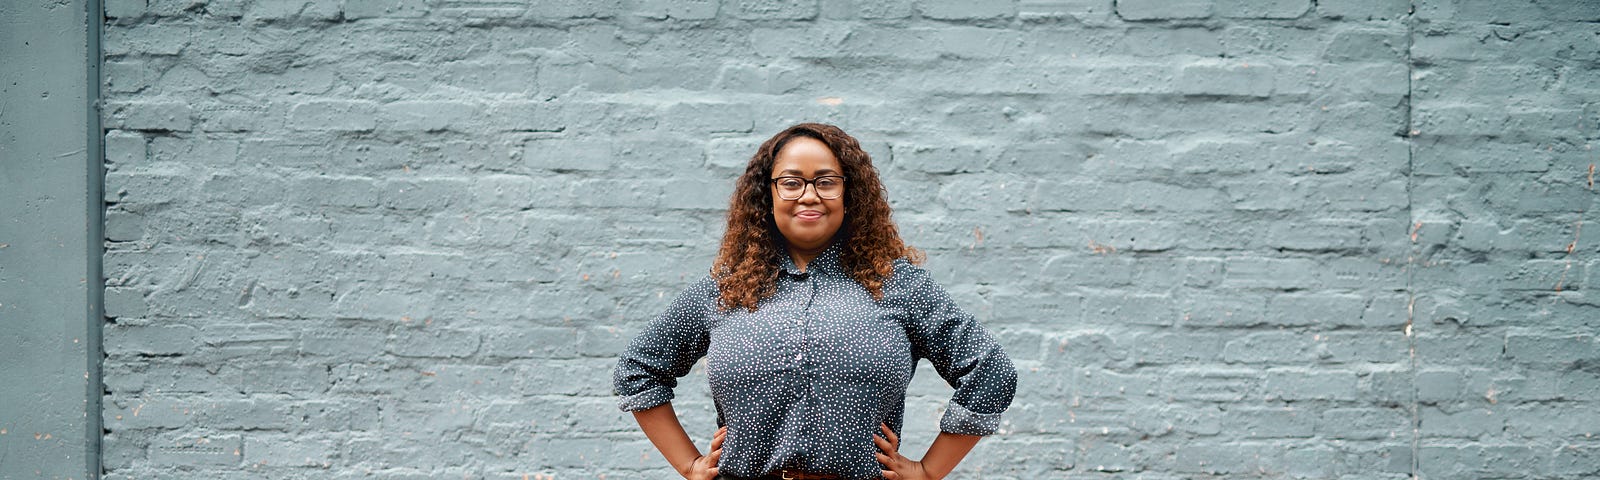 A photo of a confident black woman standing against a blue brick background in a power pose.